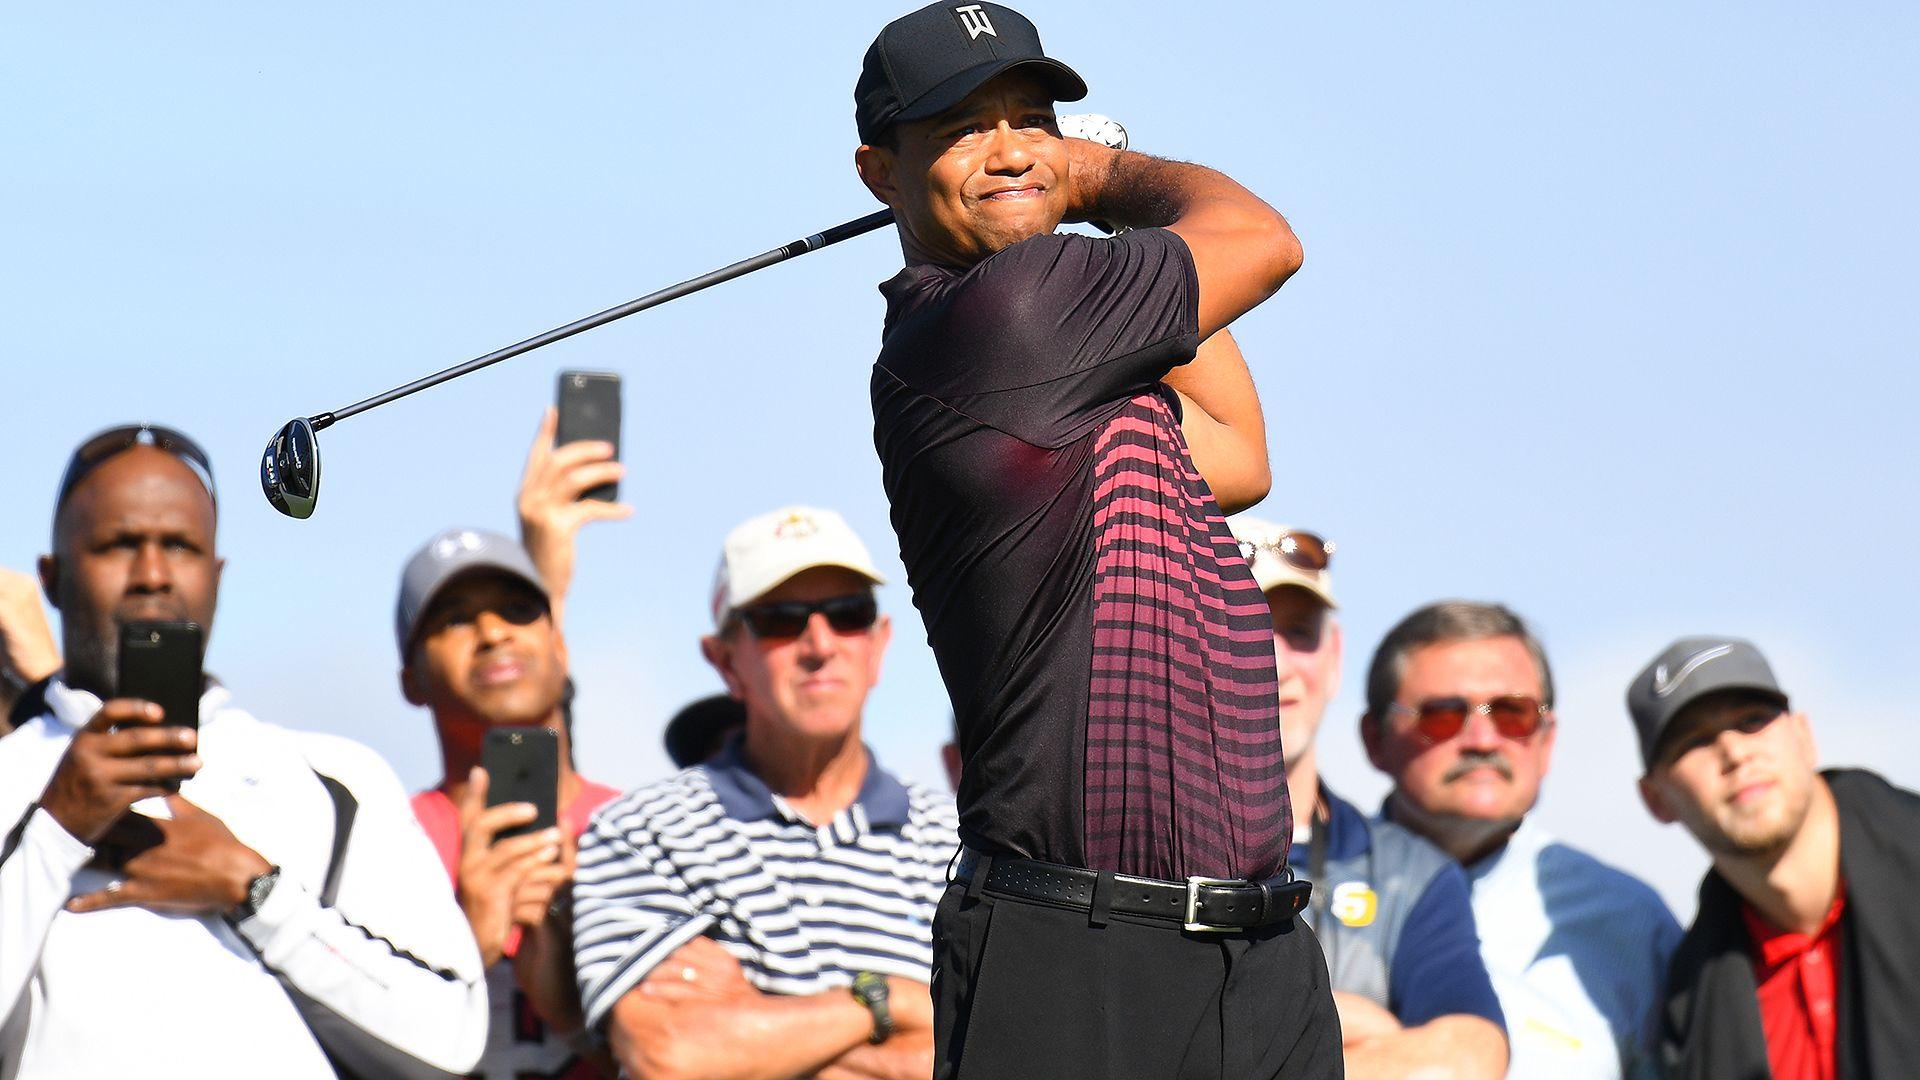 Tiger Woods happy to feel competitive nerves again at Farmers